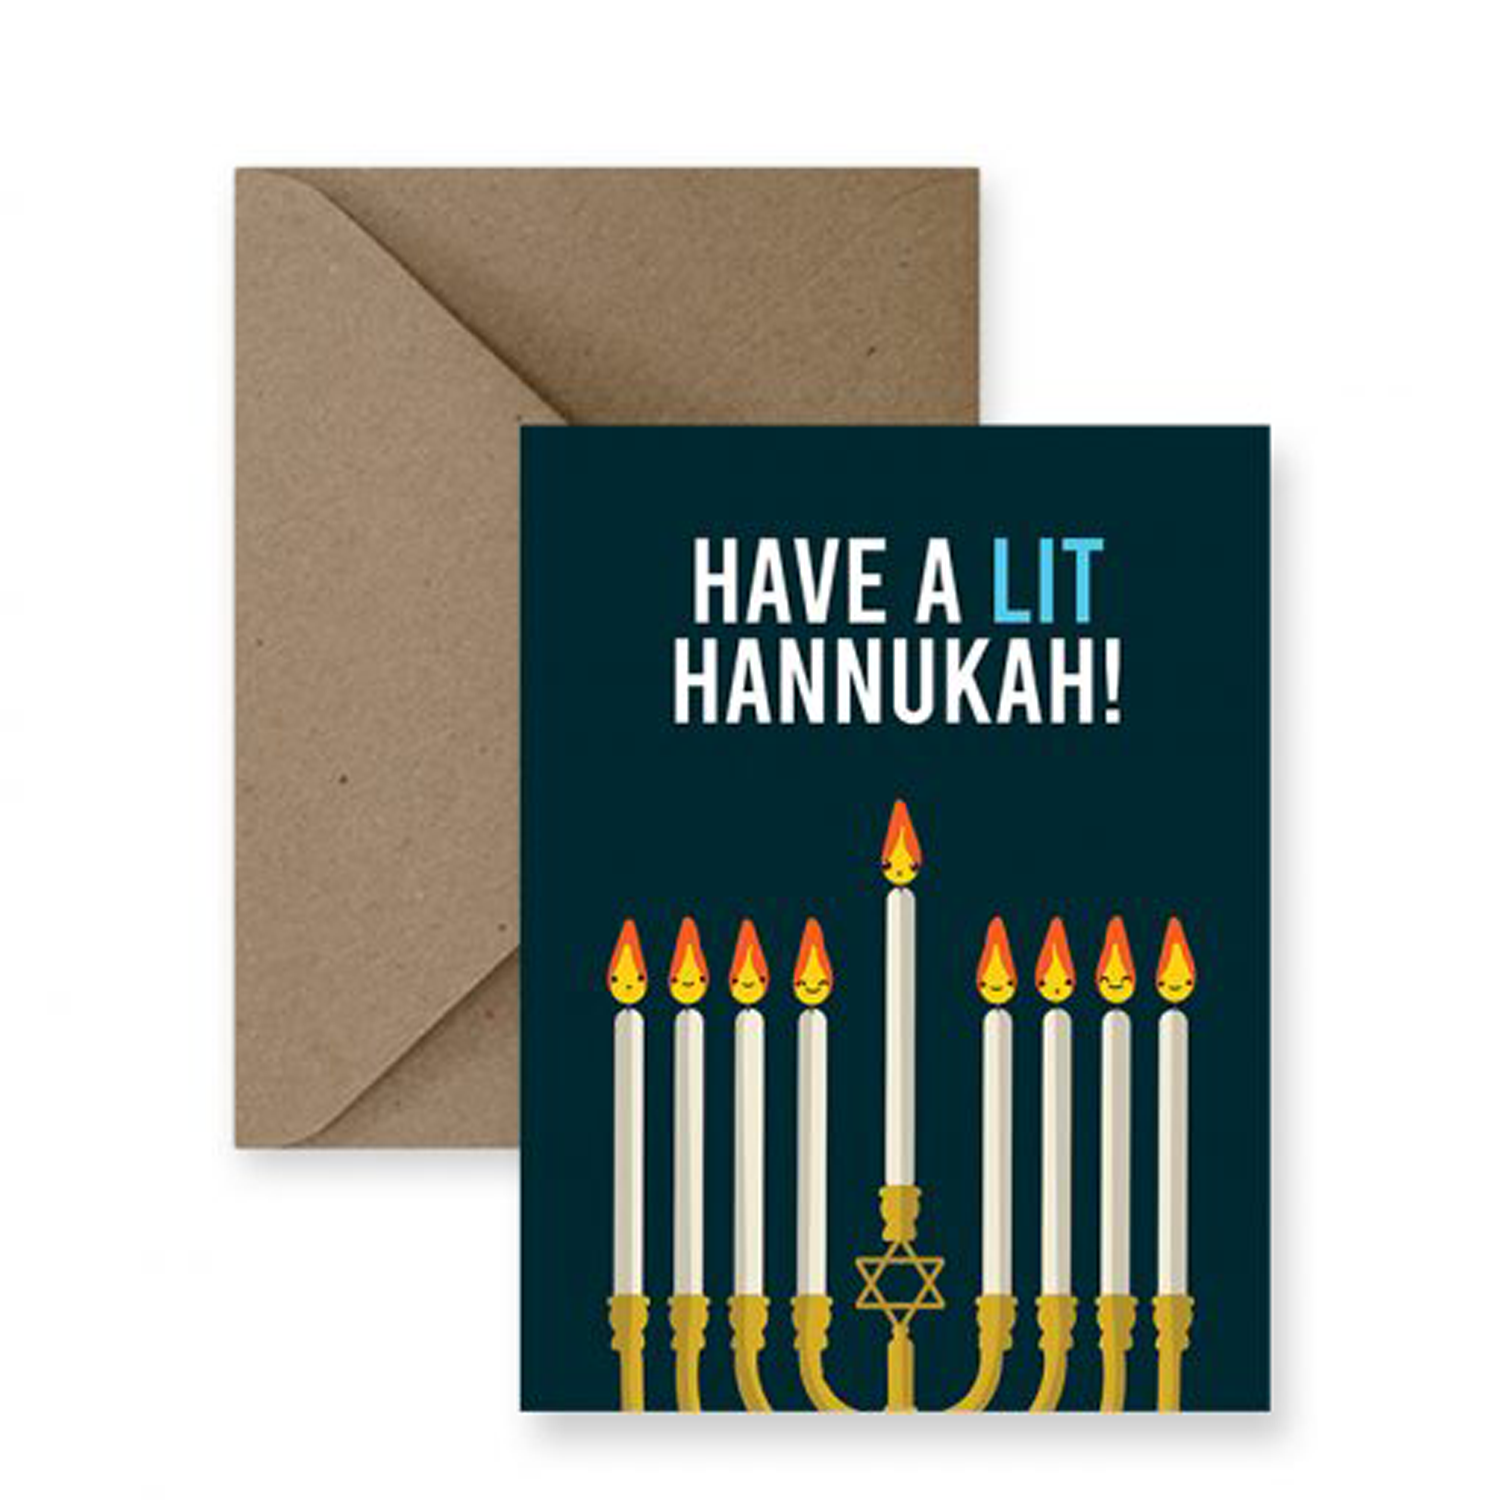 IMPAPER: Lit Hannukah Card Product Image 1 of 4